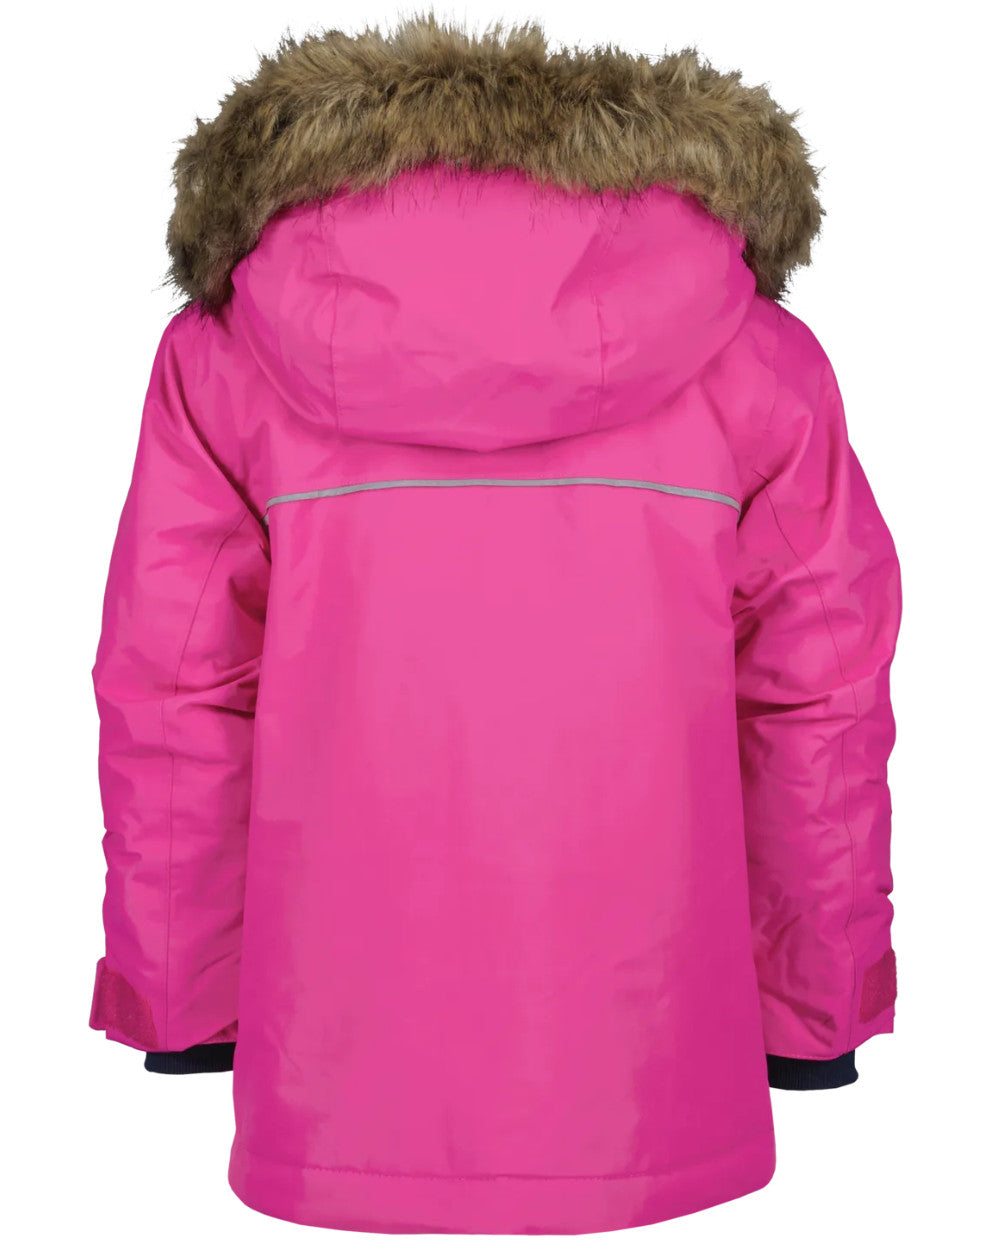 Plastic Pink Coloured Didriksons Bjornen Childrens Parka On A White Background 